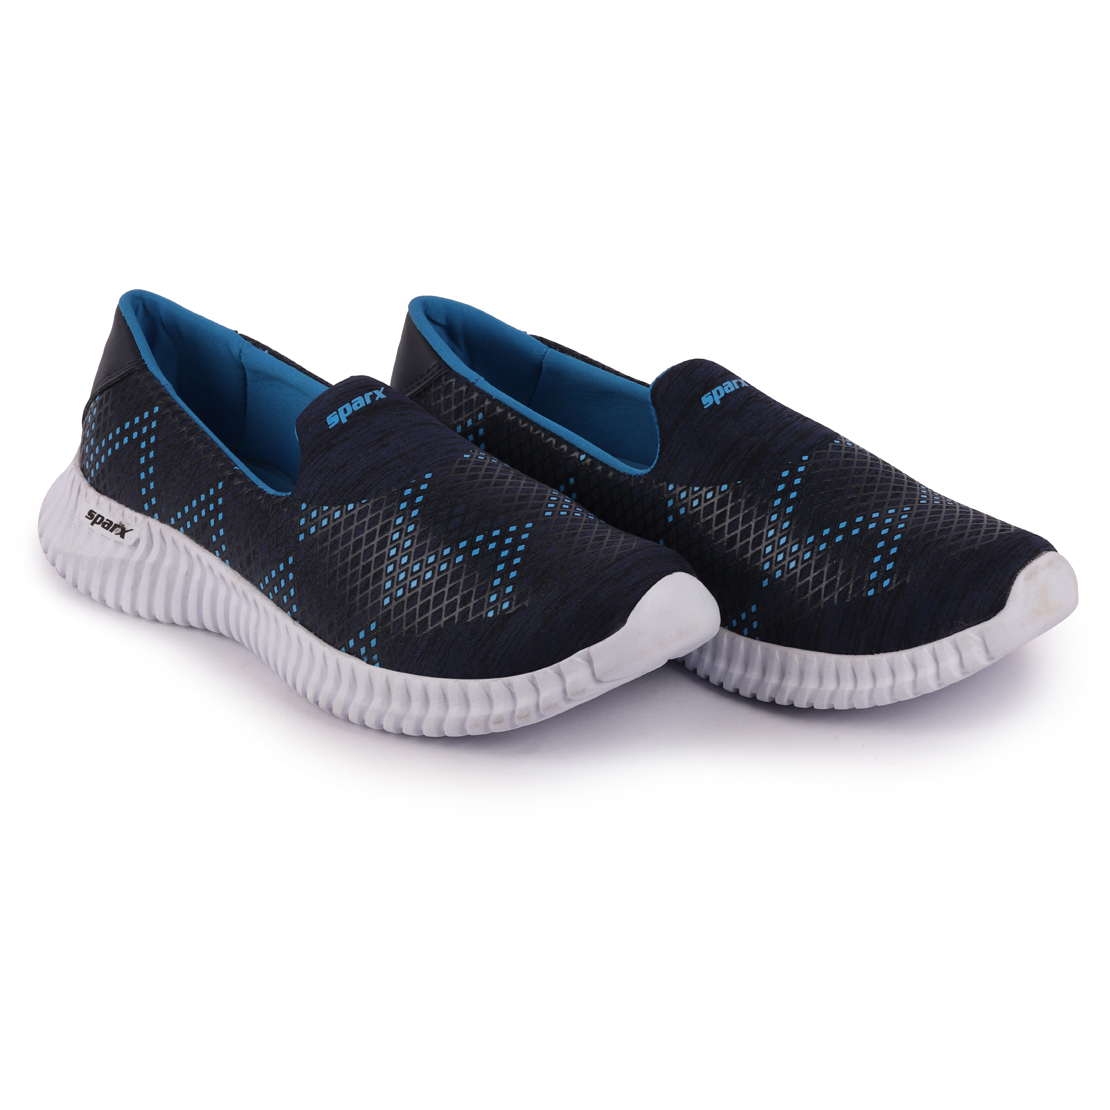 Buy Sparx Women Navy Blue Running Shoes Online @ ₹899 from ShopClues